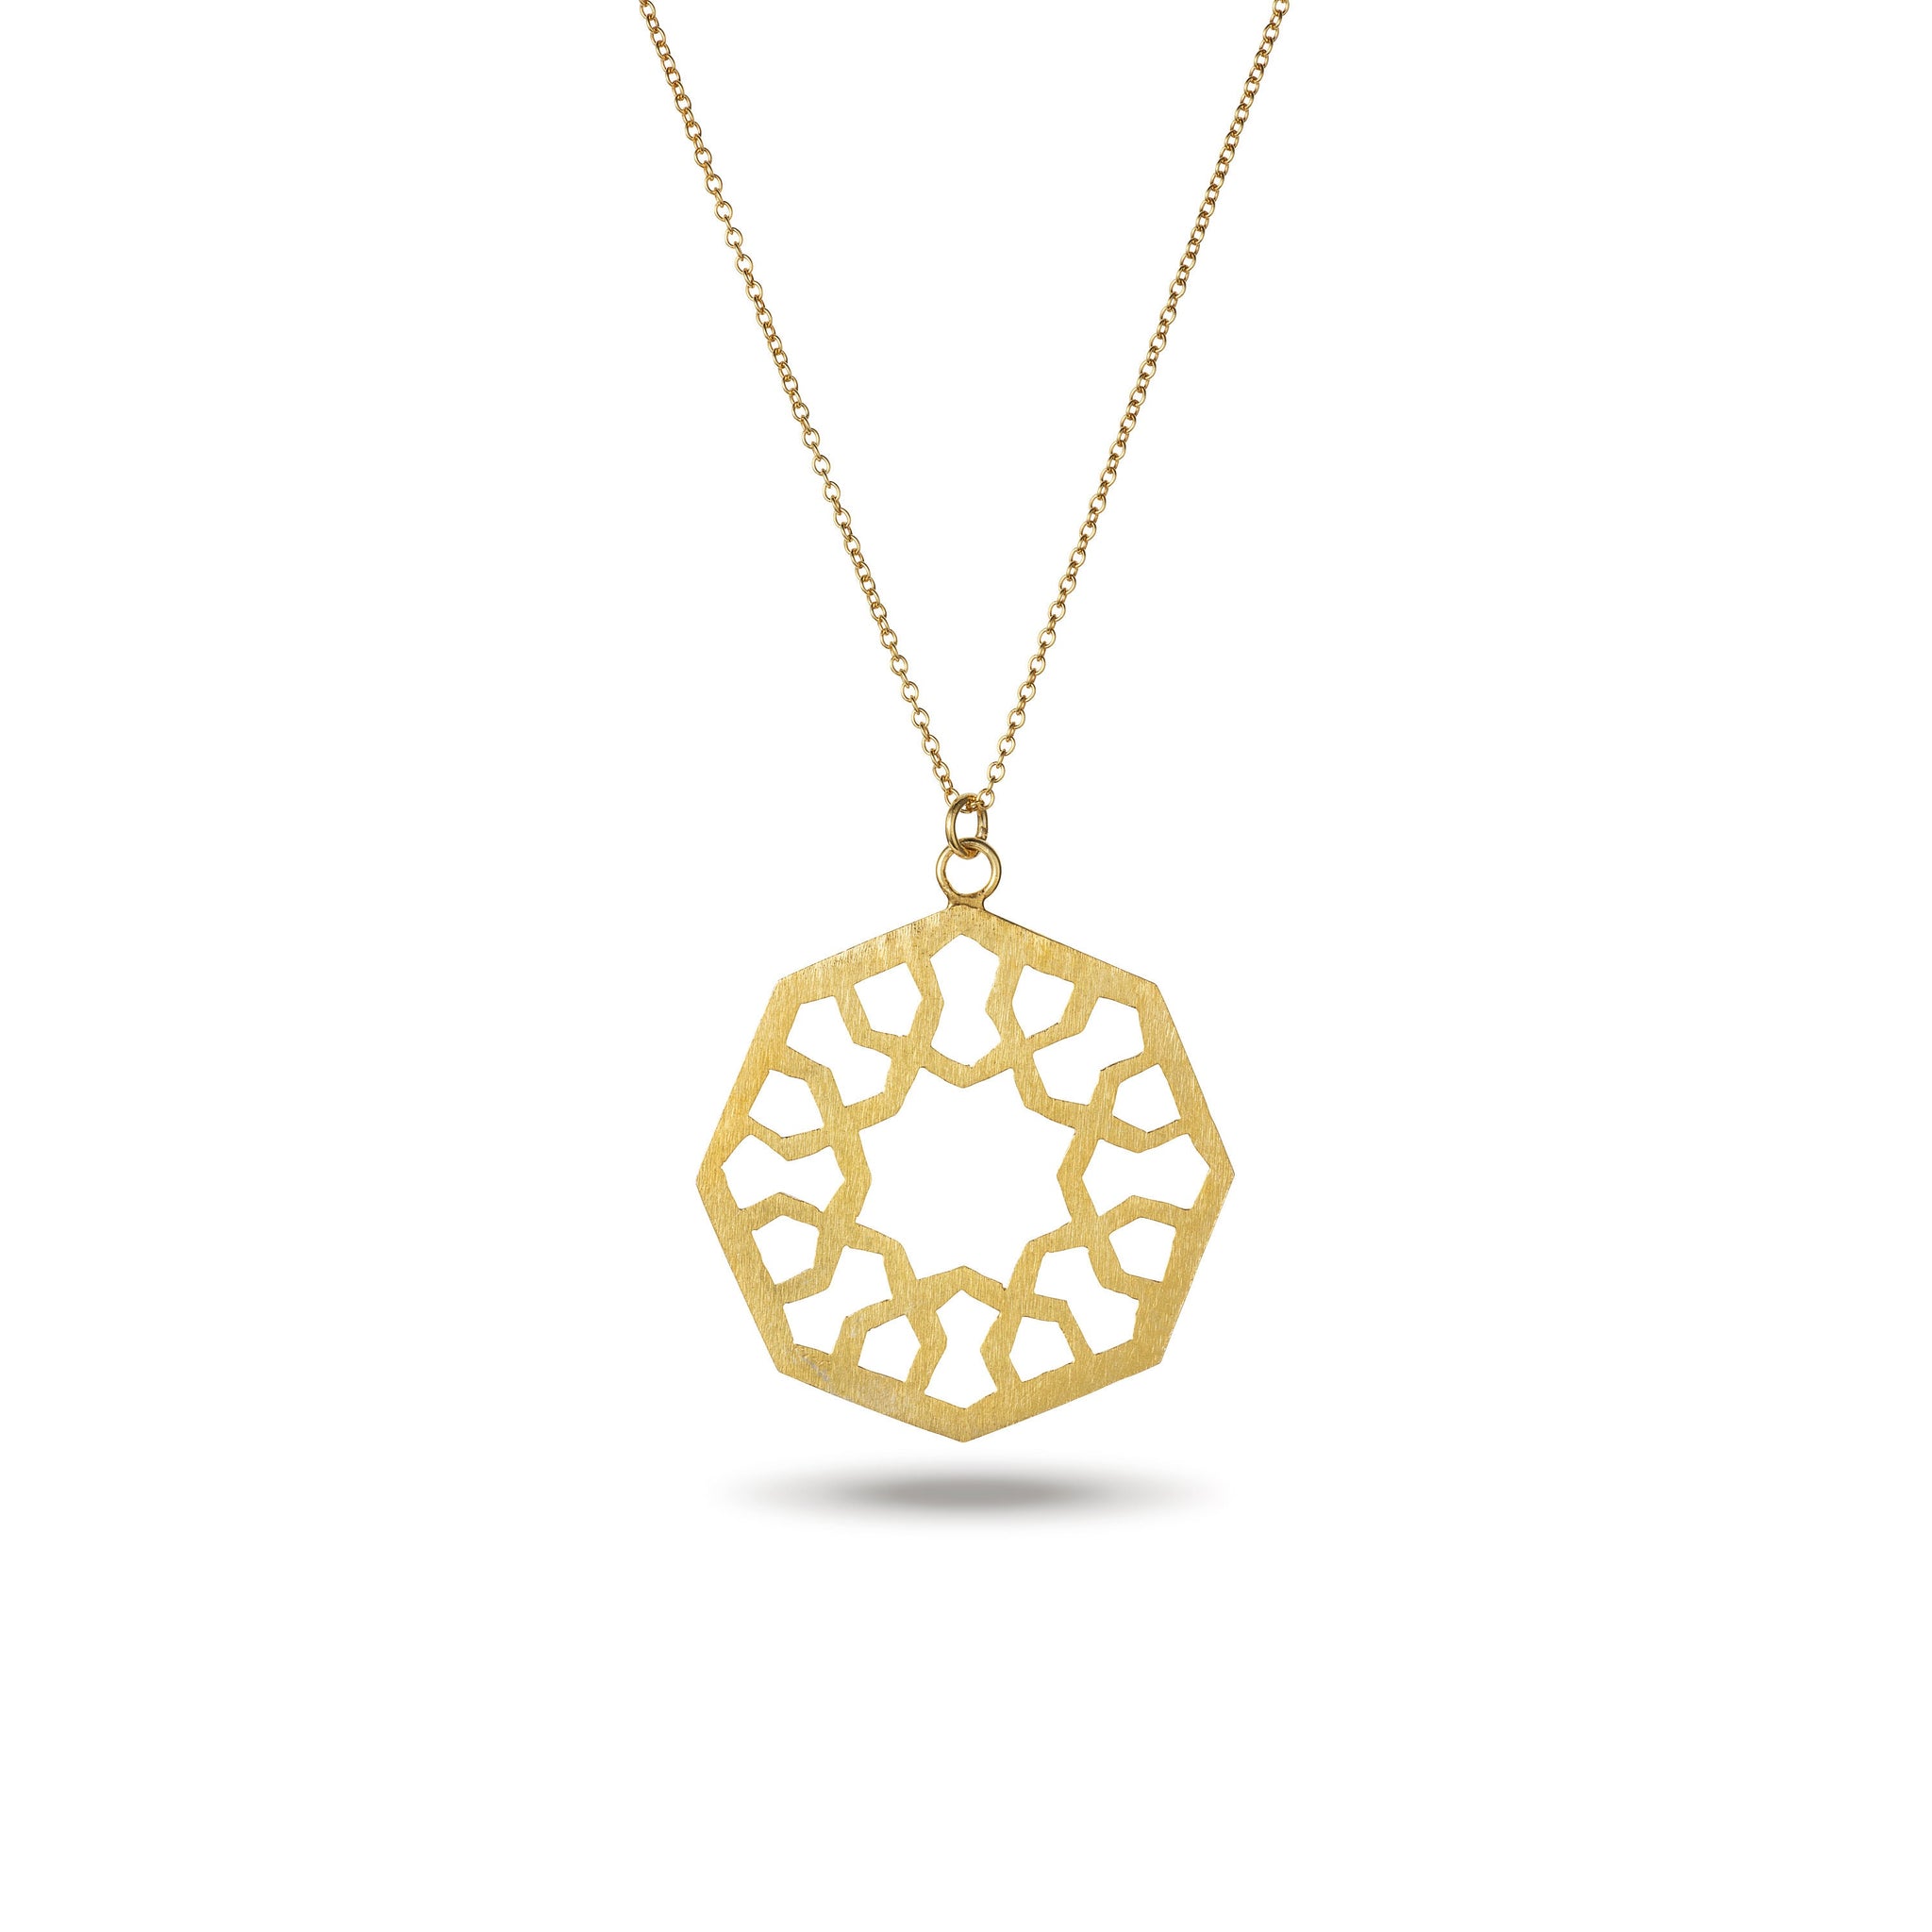 Handmade Afghan Gold Plated Brass Chain Pendant Necklace Elegant Inspired Jewelry Tessellated Motif Geometric Abstract Gift for Her